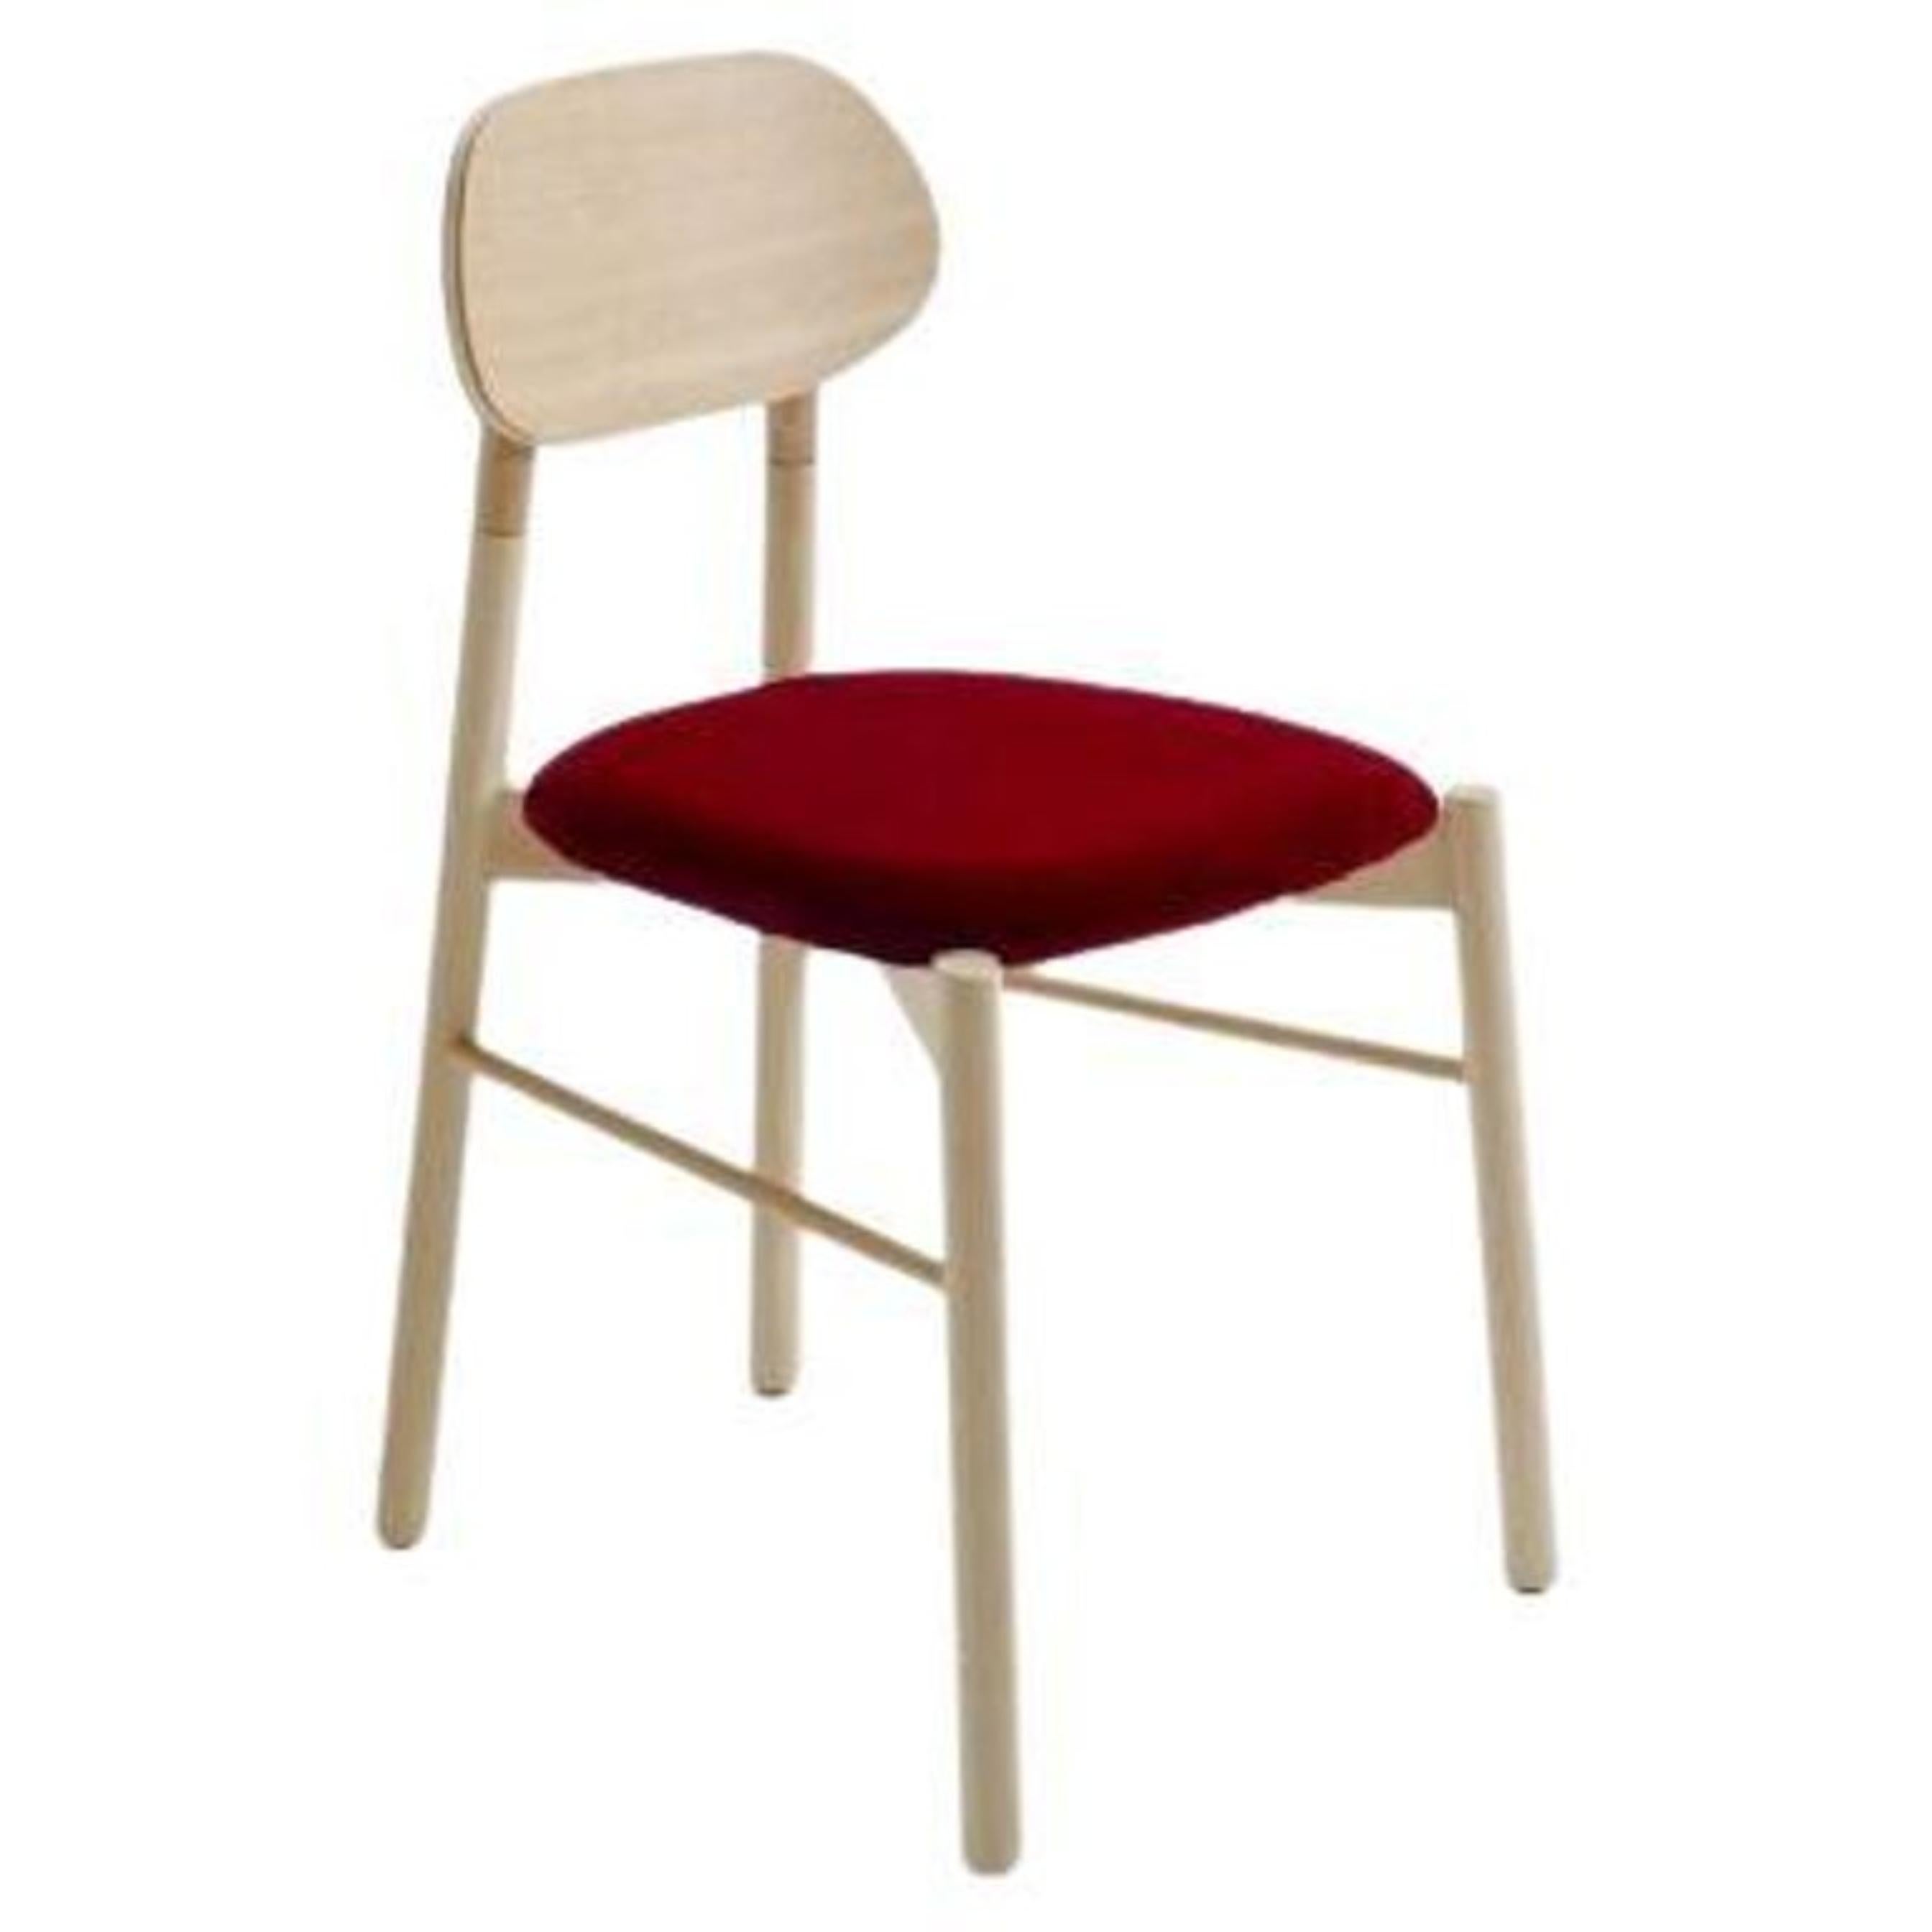 Bokken chair, Velvetorthy Padded Seat (Fabric Category C) by Colé Italia with Bellavista/Piccini
BK10ROCC37 BOKKEN chair – Natural beech_velvetorthy 37 rosso
Dimensions: H.81,7 D.49 W.53,5 cm
Materials: 

Also available: COM Fabric, Fabric Cat